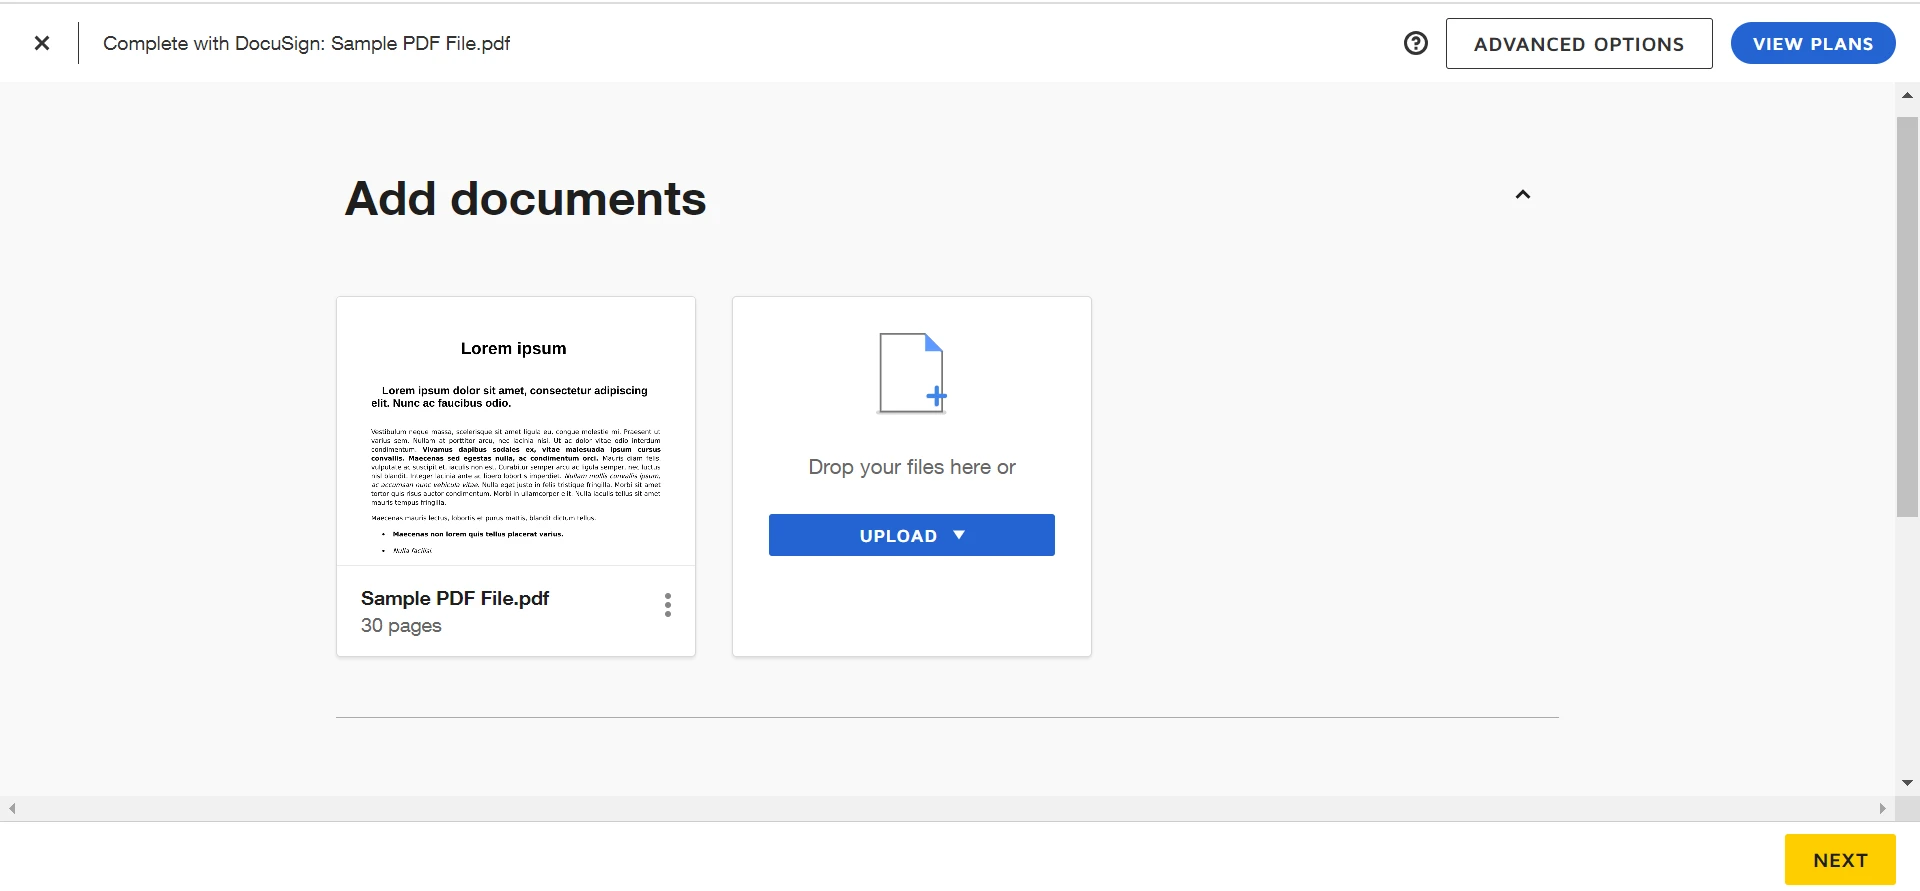 How to DocuSign a PDF (Beginner Guide): Figure 2 - Upload one or more PDF files to be DocuSigned.